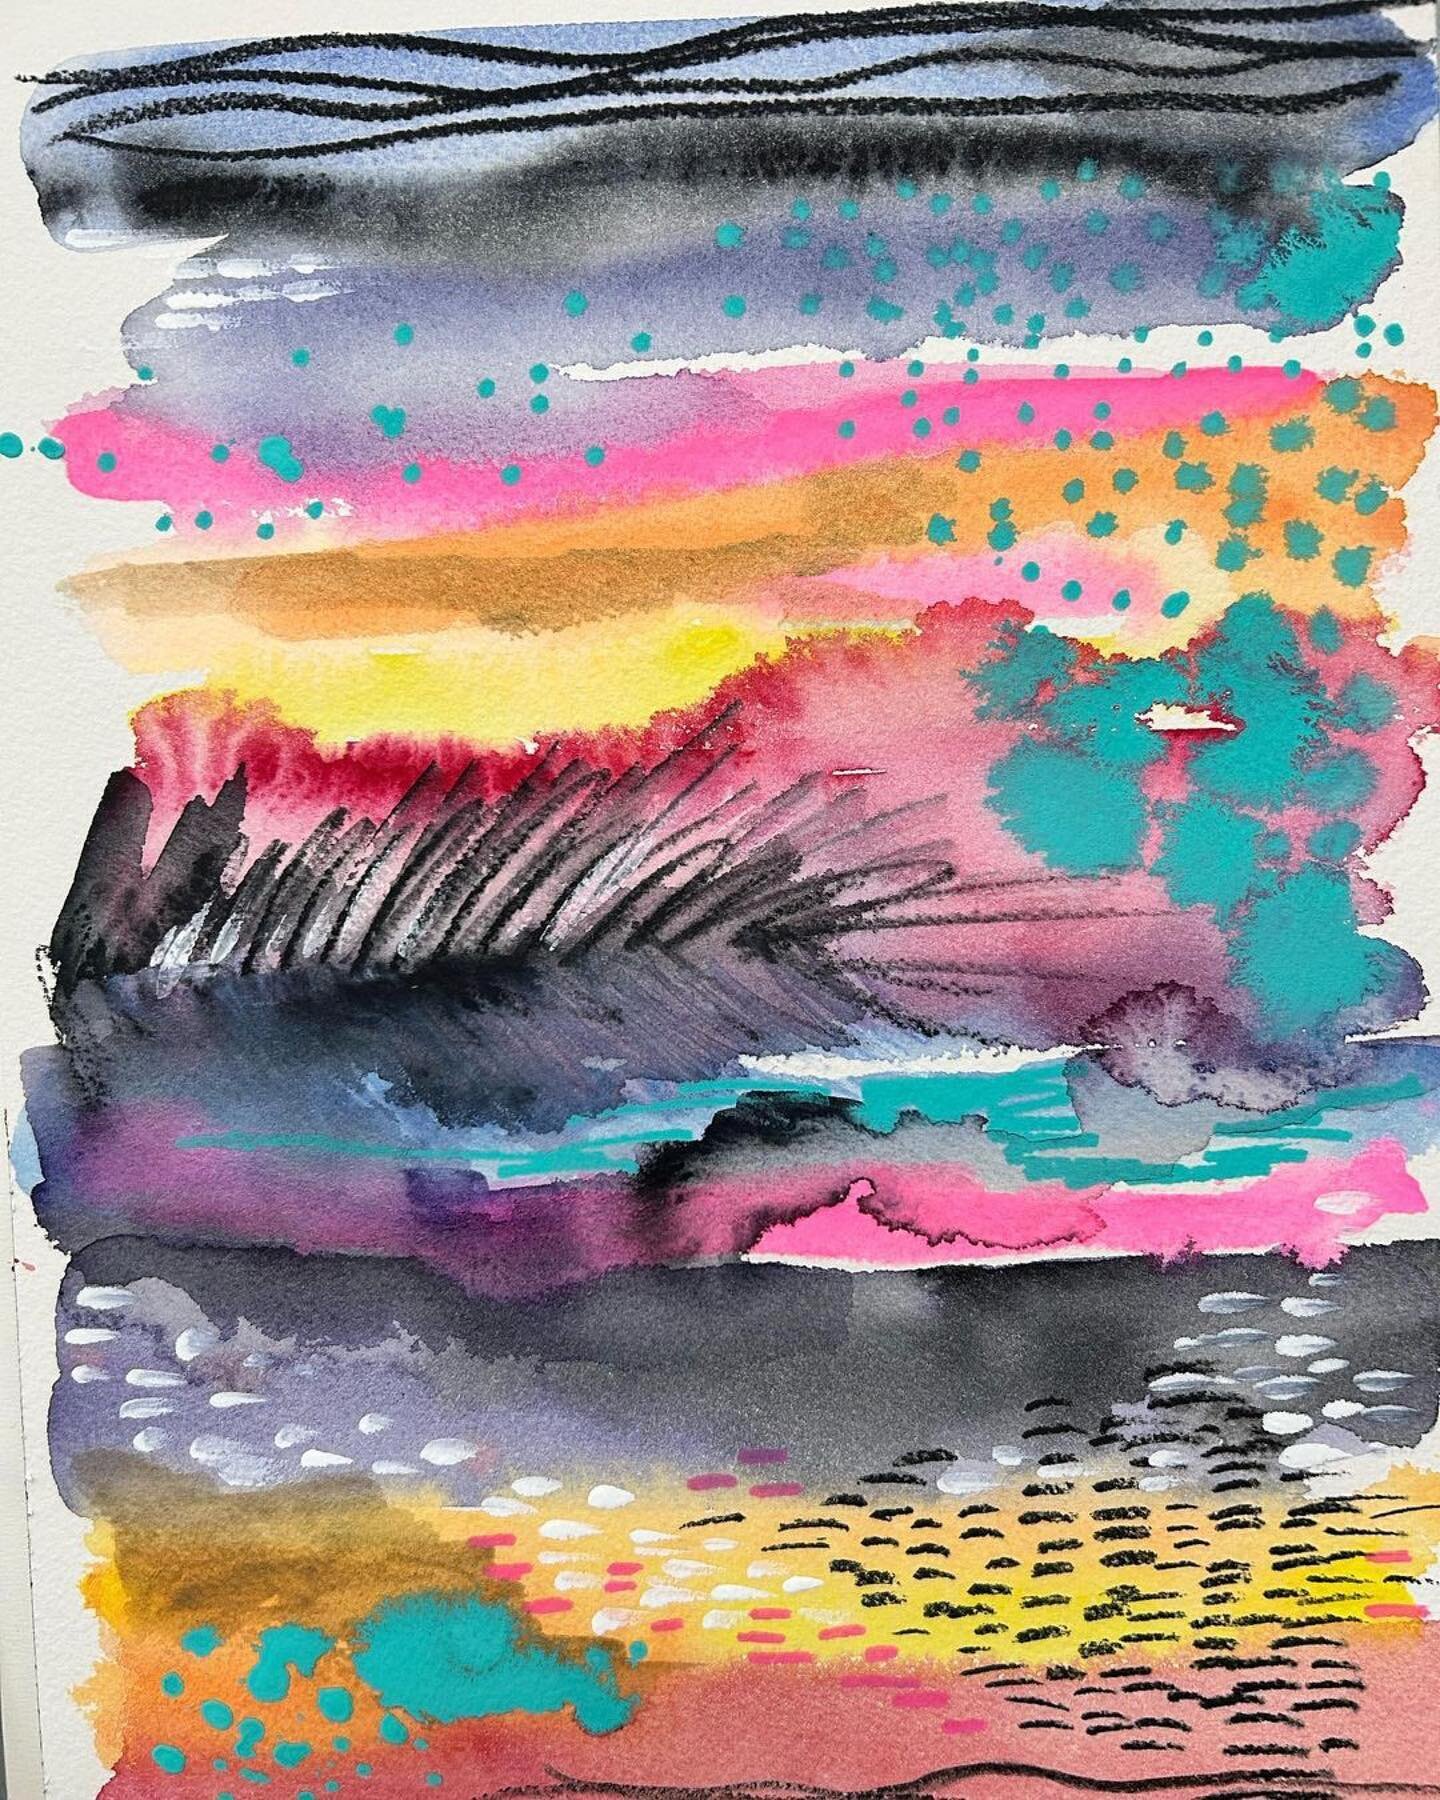 We love this art &amp; energy of @miluartstudio who&rsquo;s taking our In the Flow course 🌸☀️💕🤗
・・・
I&rsquo;m taking &ldquo;In the flow: unconventional watercolor&rdquo; with @faithevanssills &amp; @matiroseart.

We&rsquo;ve been introduced to con